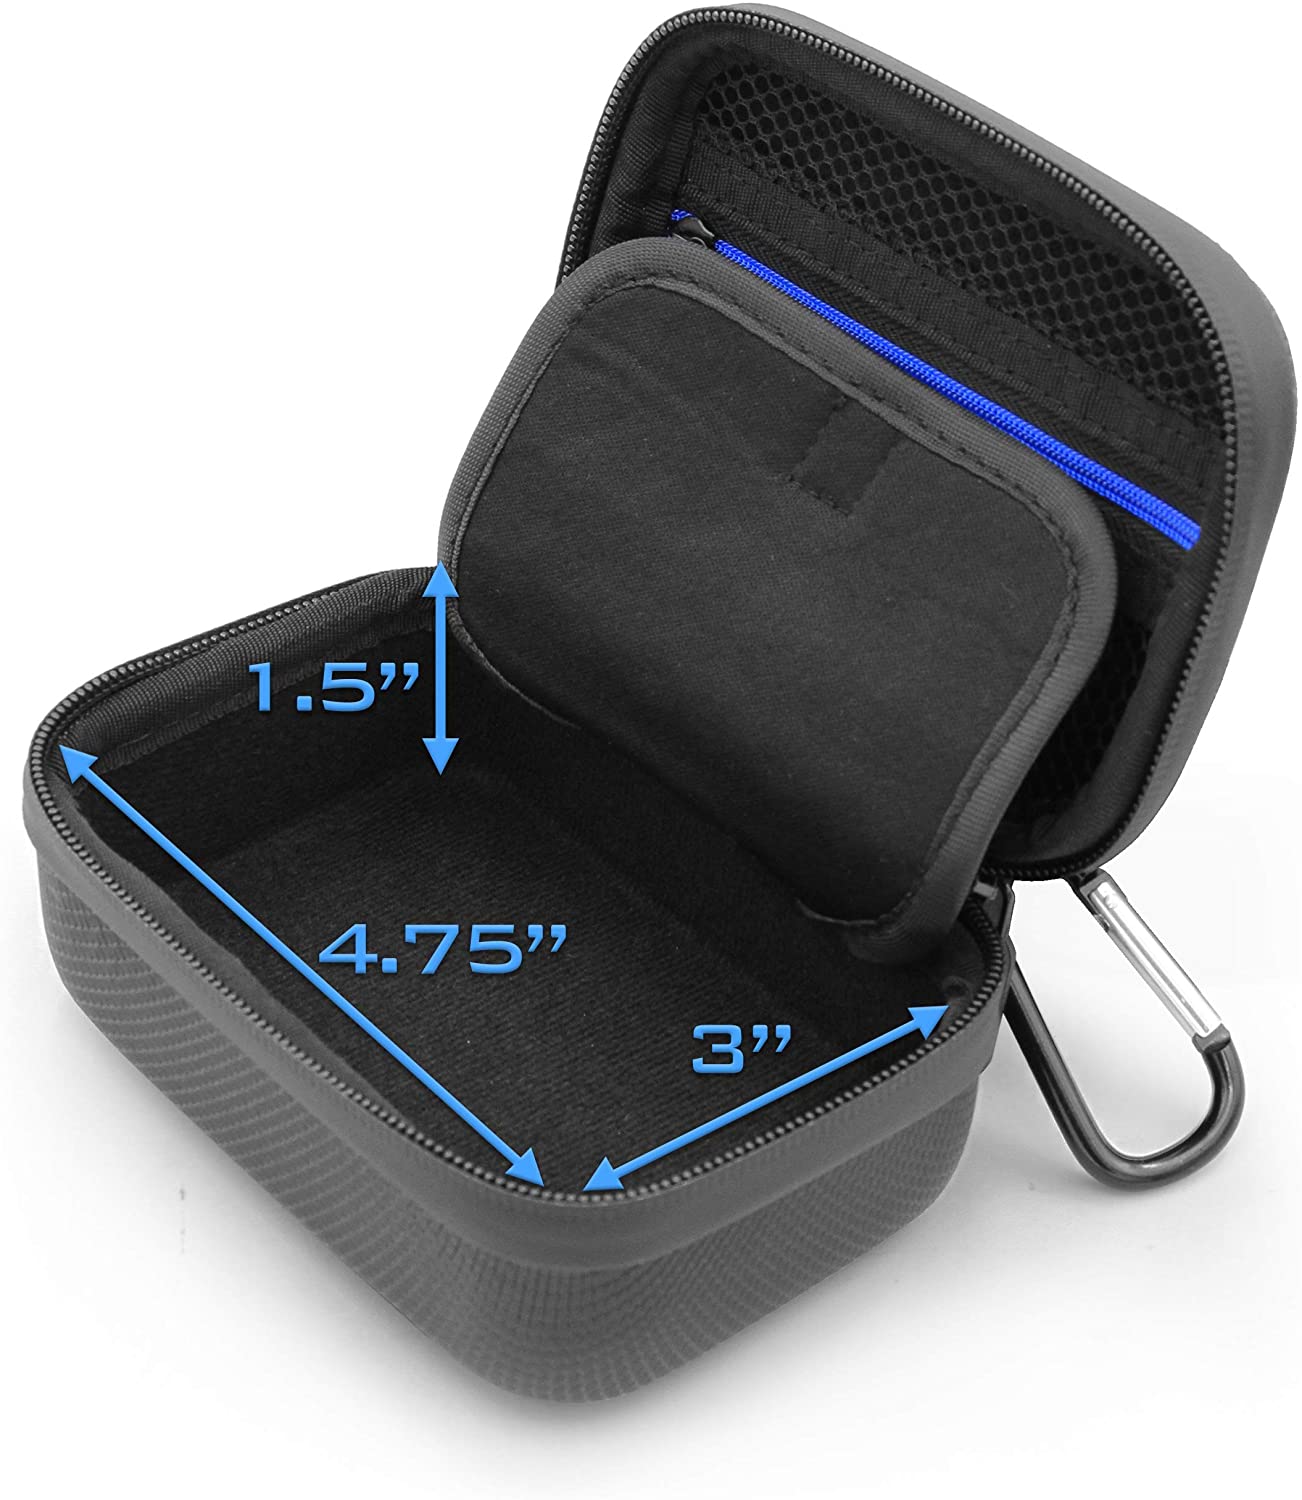  Aenllosi Hard Carrying Case Replacement Compatible with Jetpack  Verizon MiFi 6620L/8800L,Holder for Jetpack 4G LTE Mobile Hotspot & USB  Charging Cable(Case Only) : Electronics